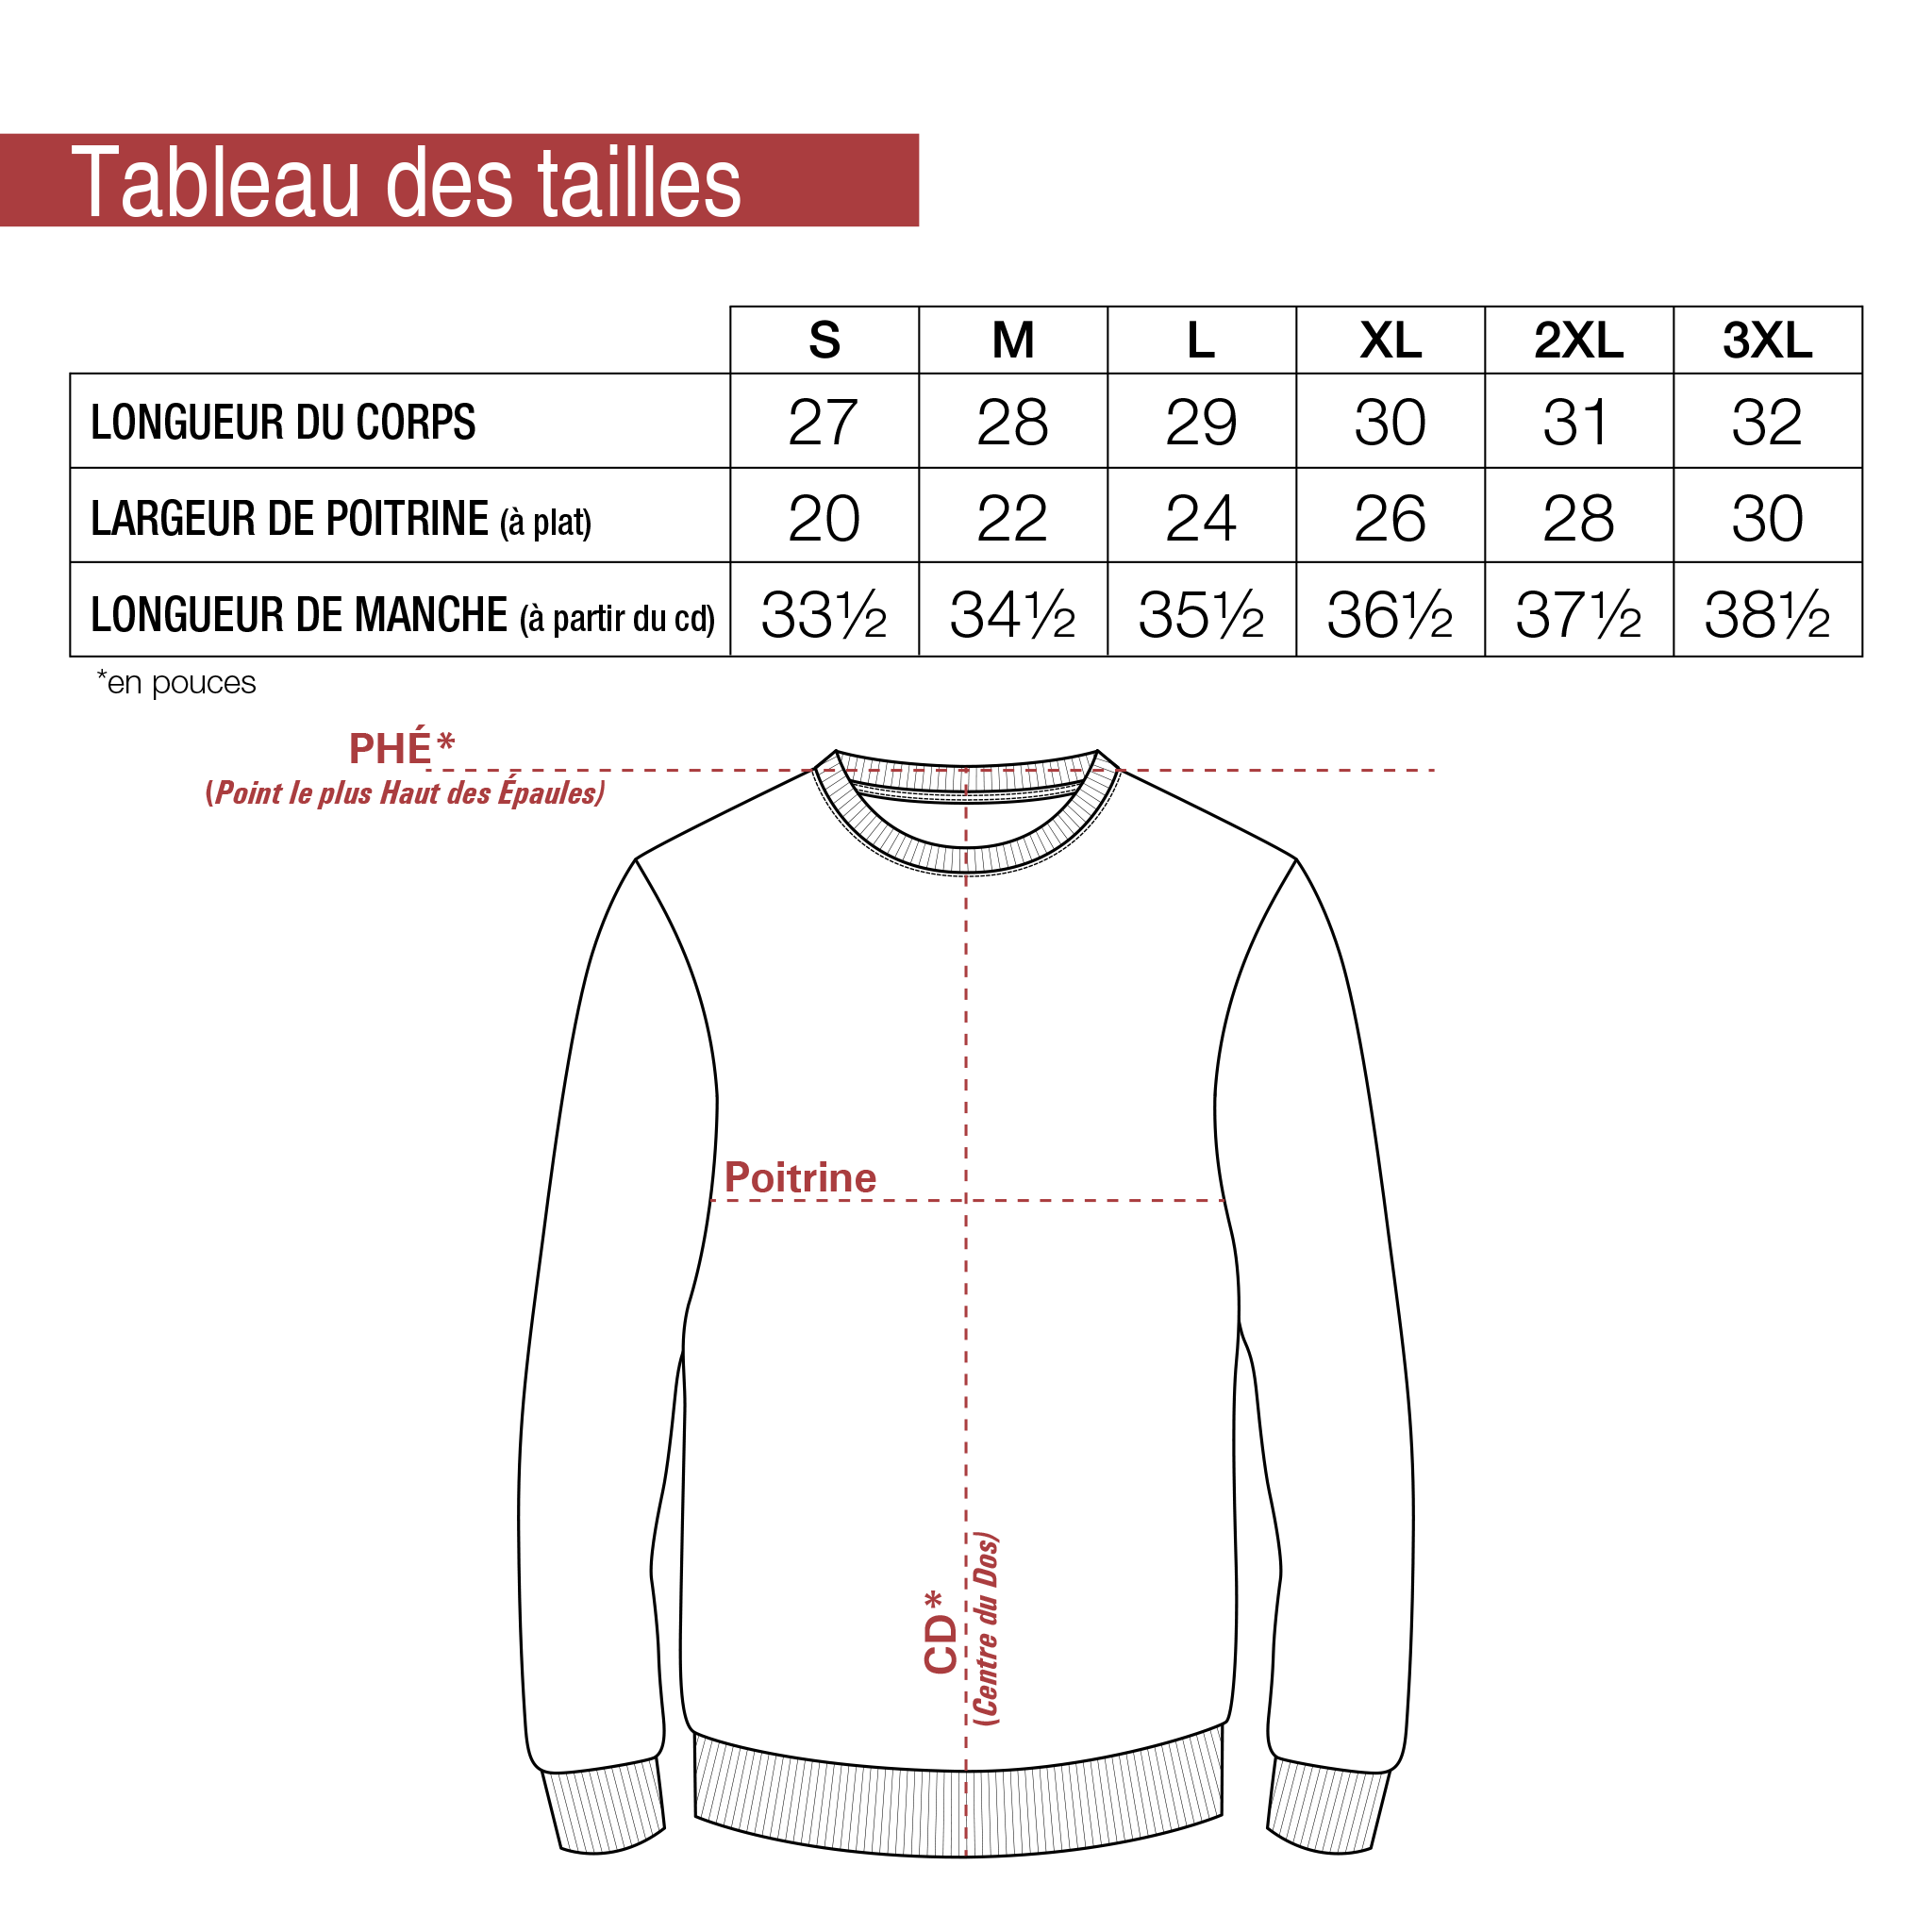 Tableau-taille-18000_51164bef-d535-487a-a8db-dd85007114c1.png